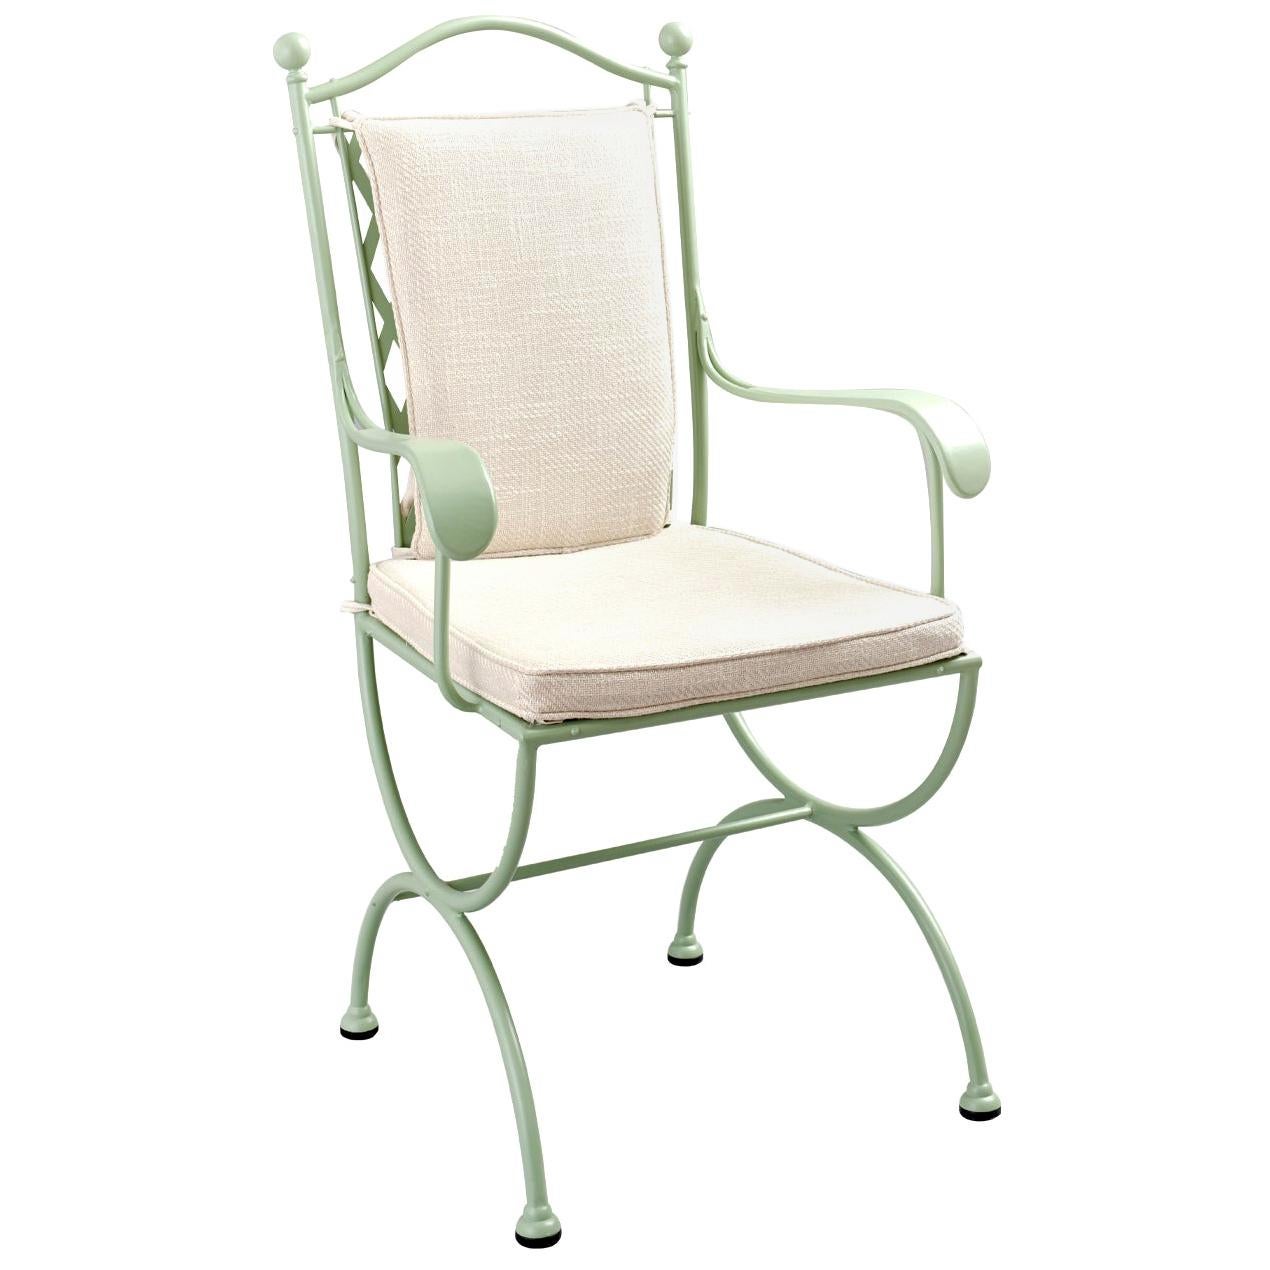 Rombo Outdoor Green Chair with Armrests For Sale